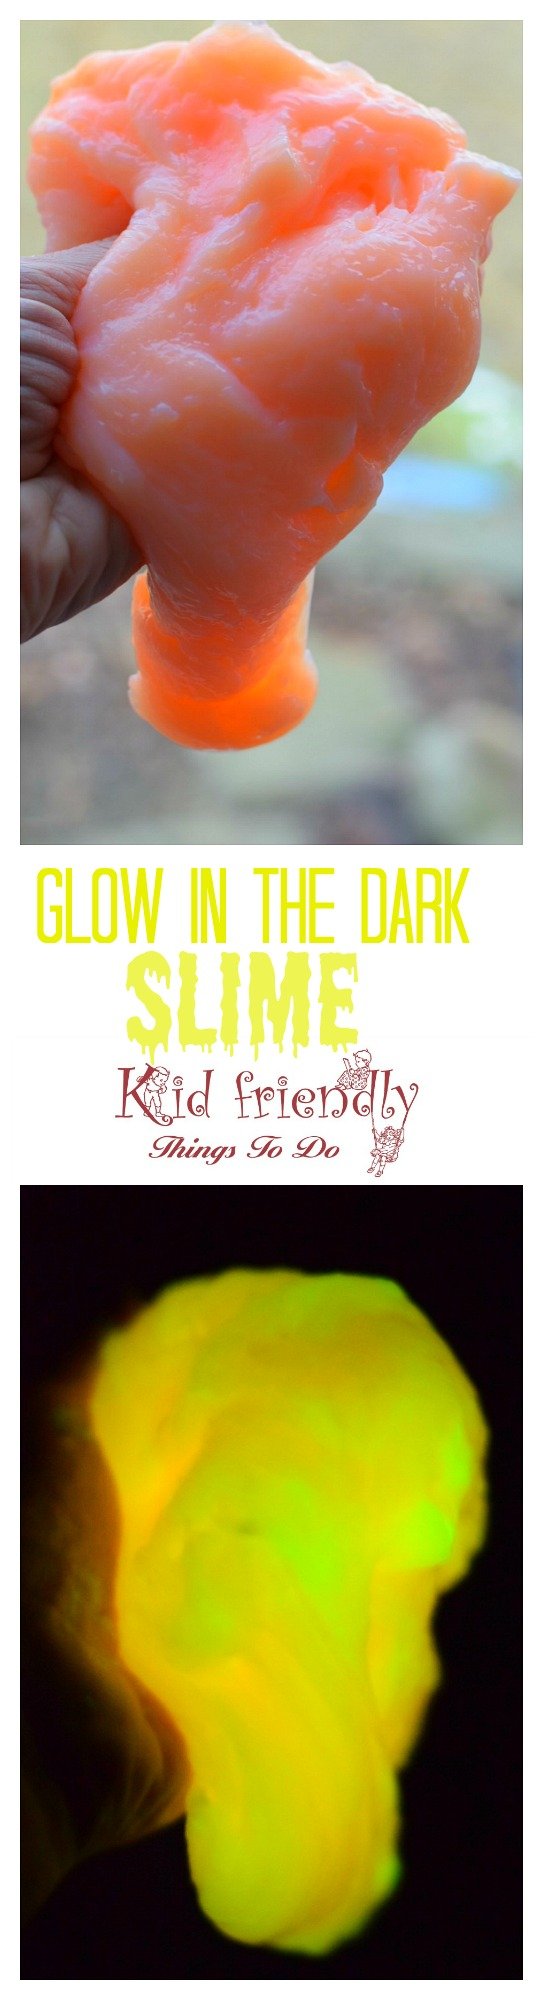 How to make Easy Glow in the dark slime with 4 ingredients! So much fun to do with the kids. You can substitute liquid starch if you don't want borax. www.kidfriendlythingstodo.com